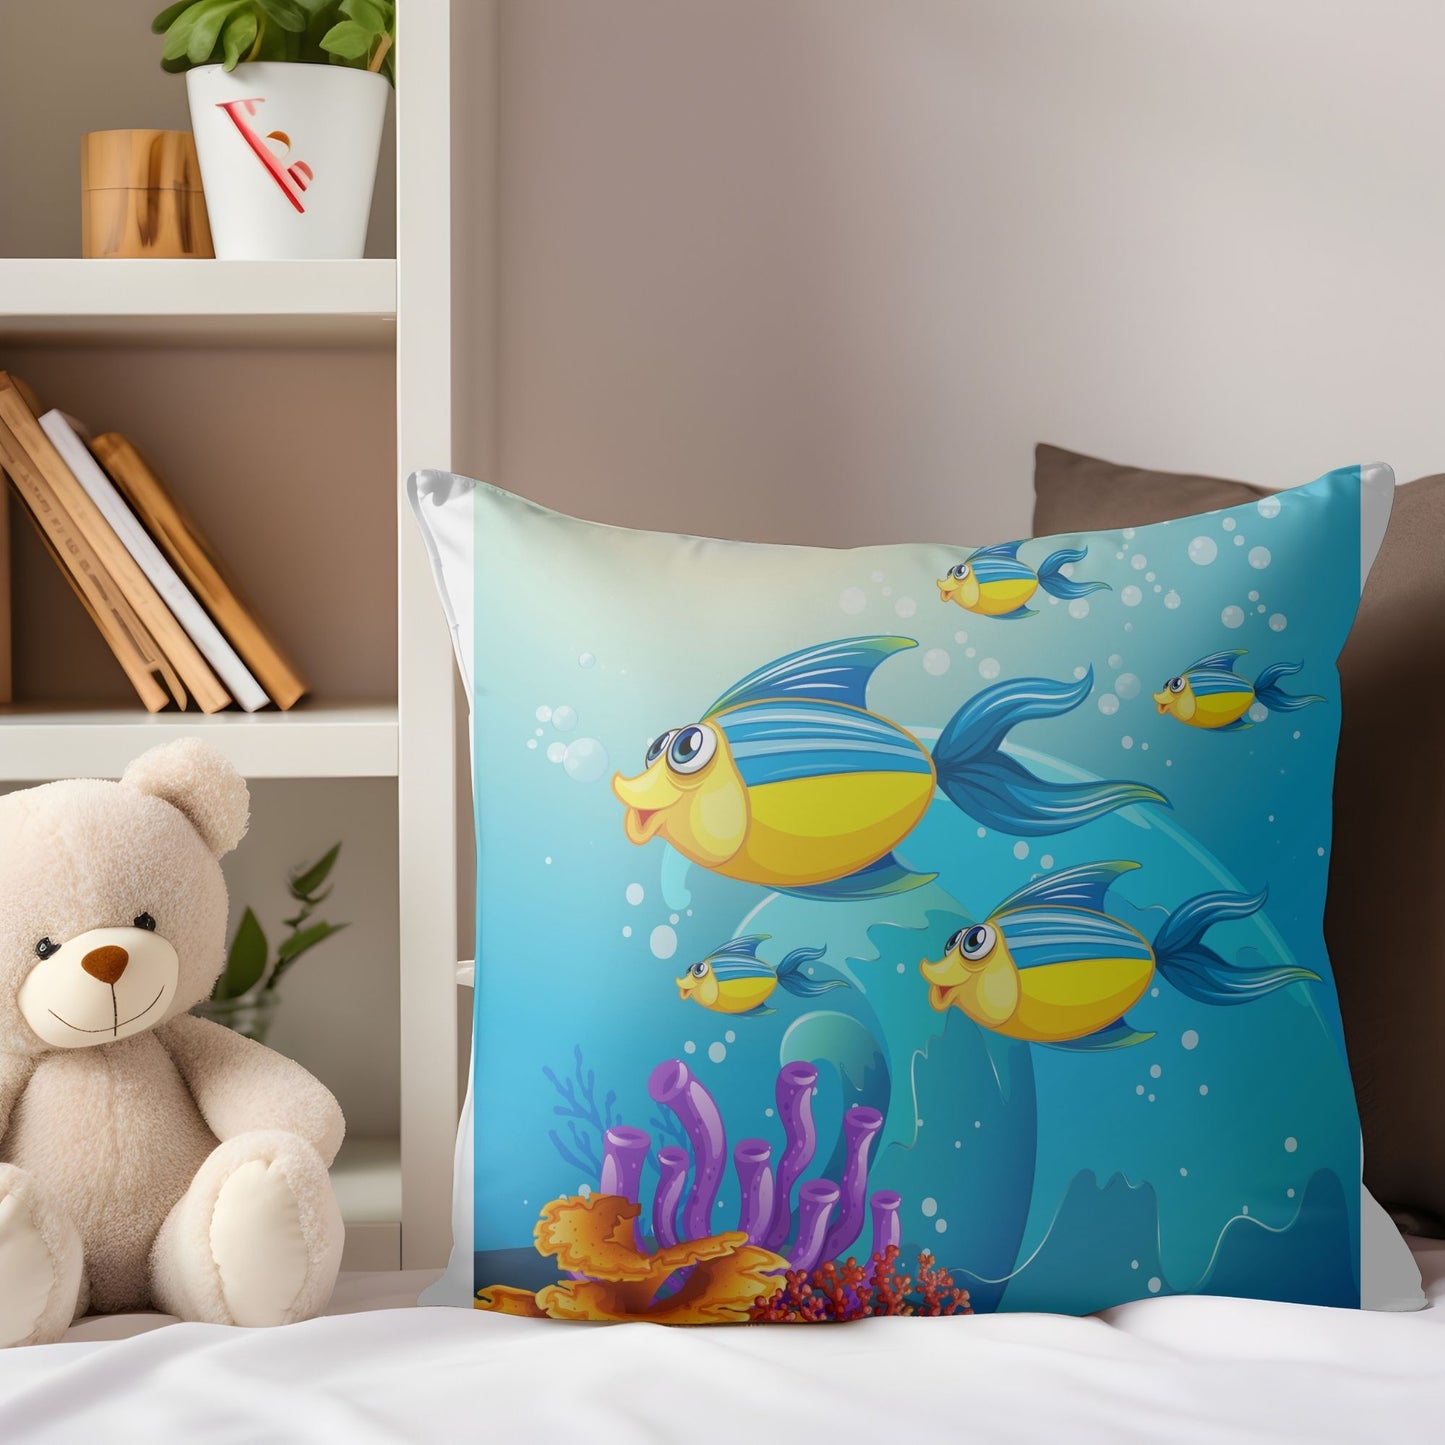 Soft pillow adorned with colorful ocean fishes for kids' rooms.